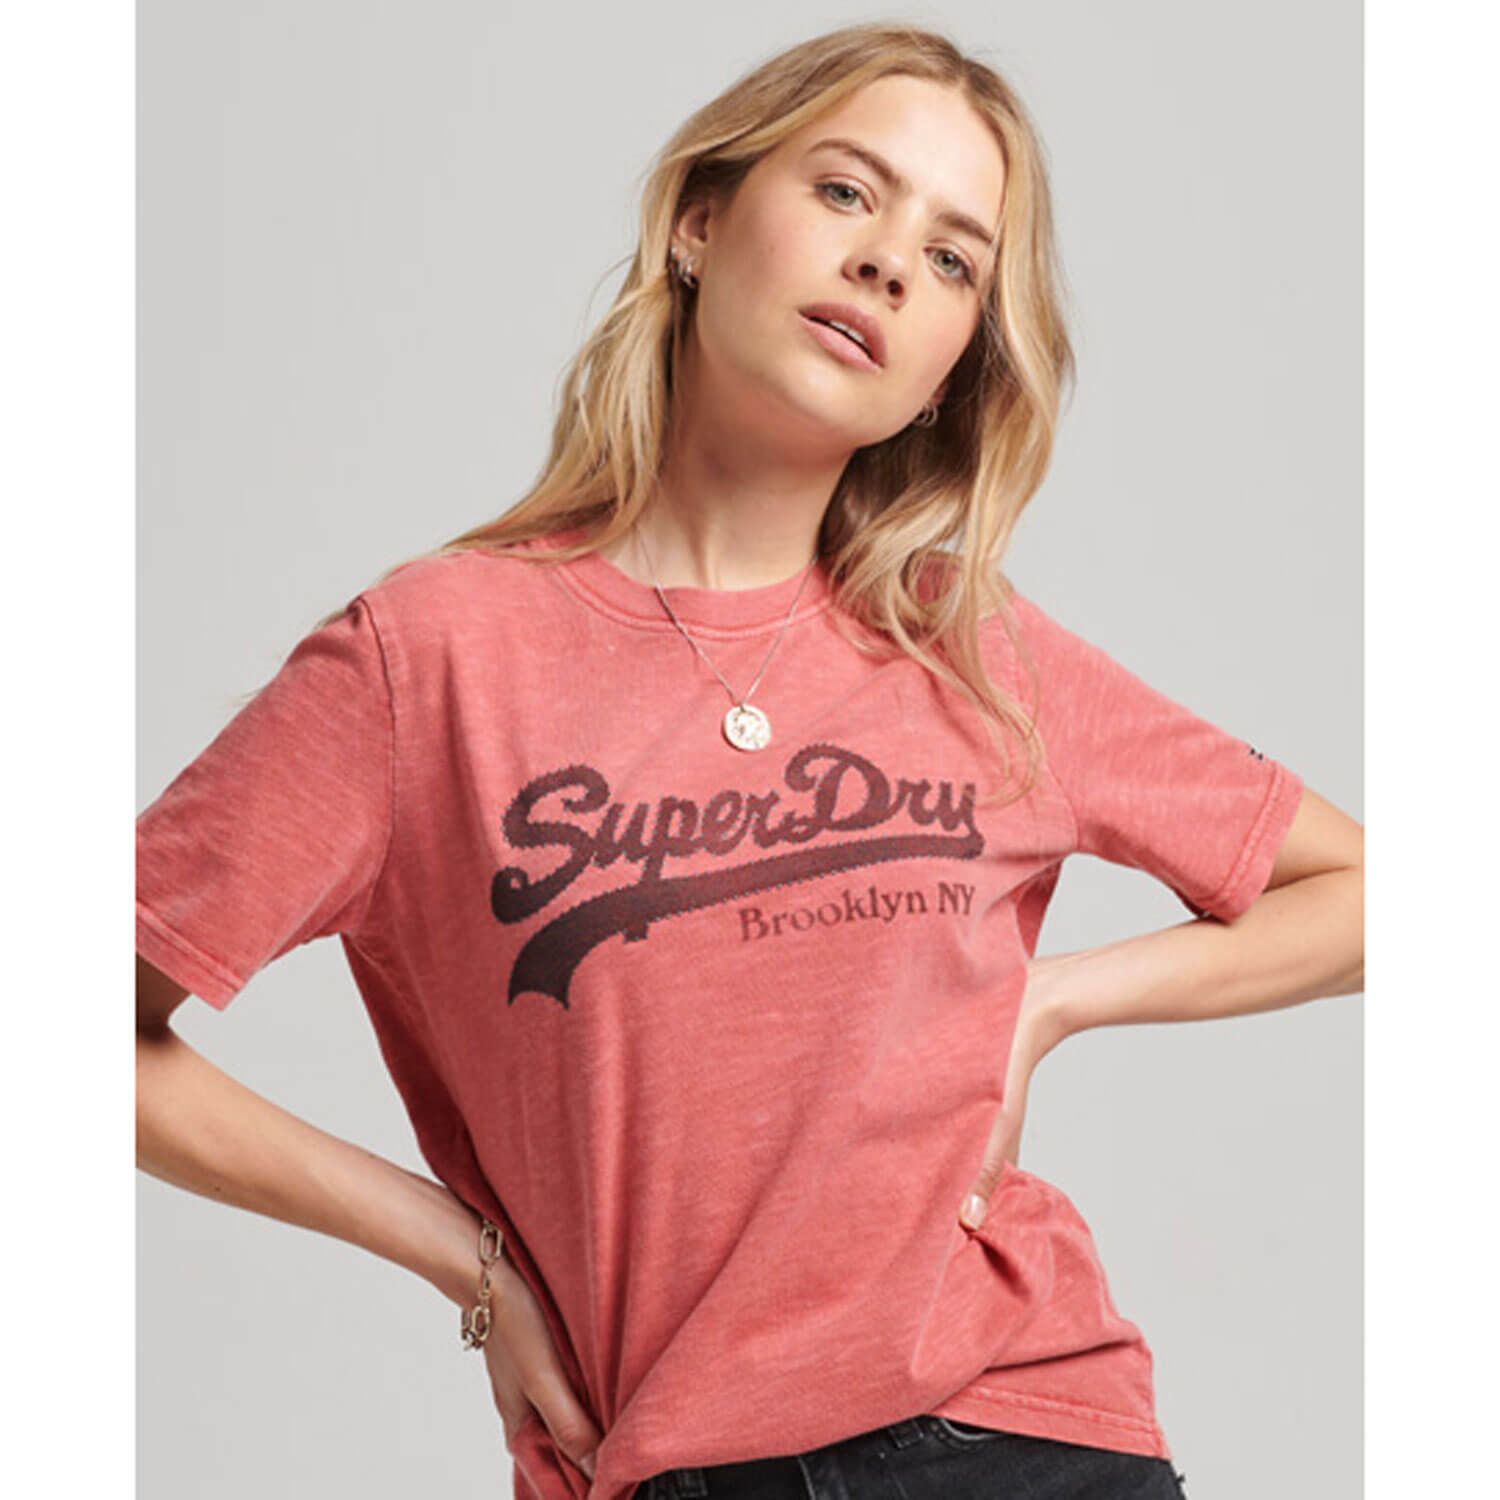 Superdry Embellished Graphic Logo T-Shirt - Rose Dust 1 Shaws Department Stores